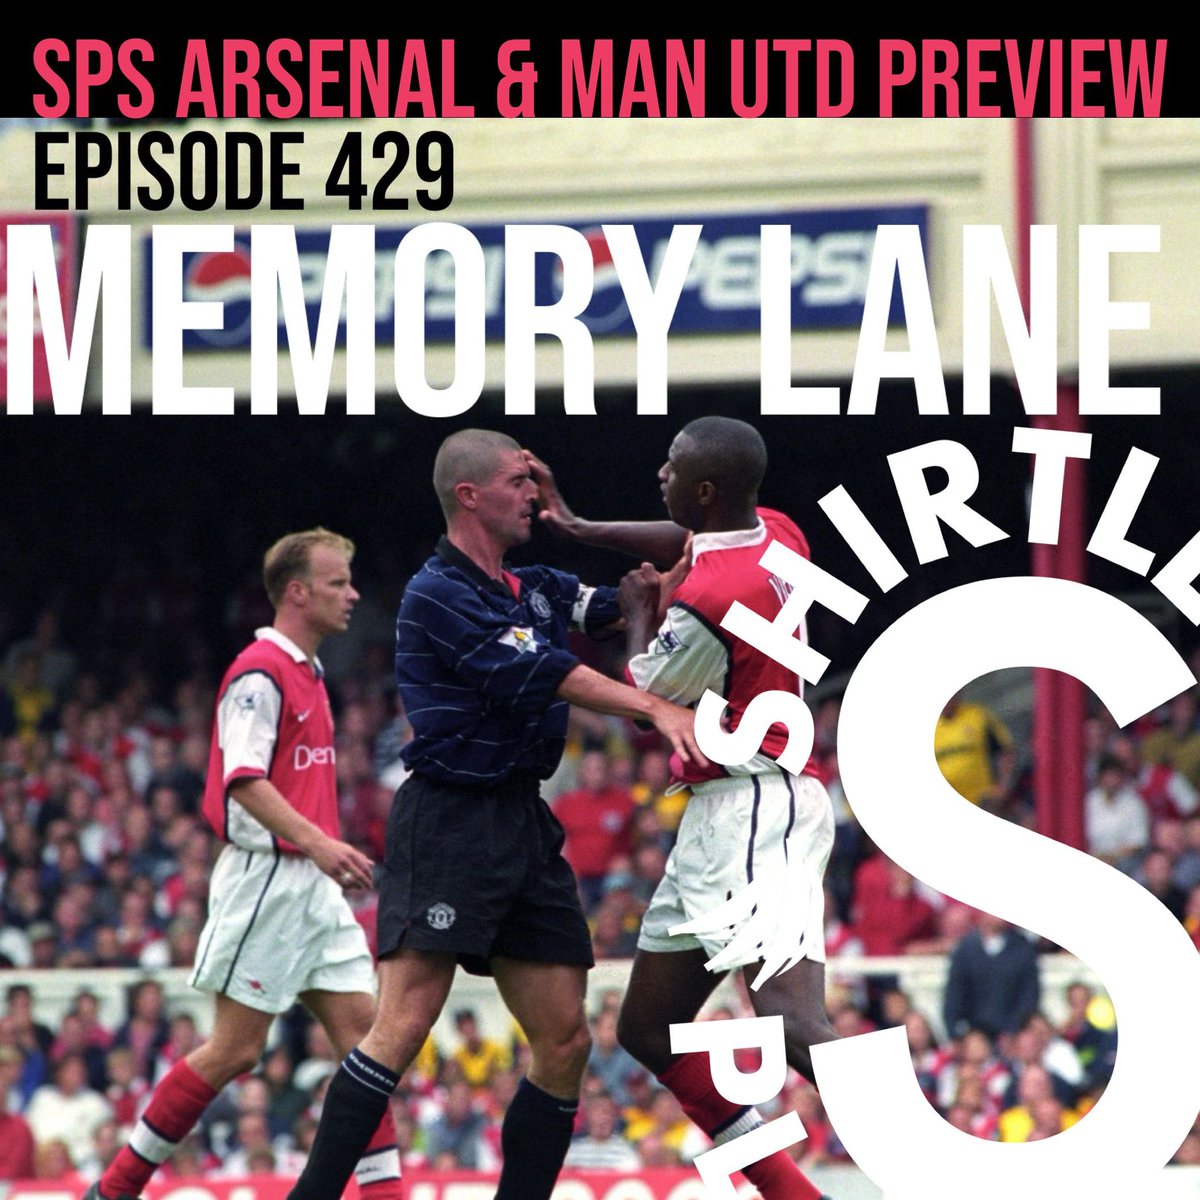 @mitchpeotter @math_rtf @EmilyHigg @tsnmknd @LobRucci It’s the ‘SPS Derby Week™️’ again, so join Tosin & Coach for a joint Arsenal vs. Man Utd preview! The fellas take a trip down memory lane & answer your questions about the big one. Tap in! 🍎: podcasts.apple.com/us/podcast/shi… 🟢: open.spotify.com/episode/7qRHZx…